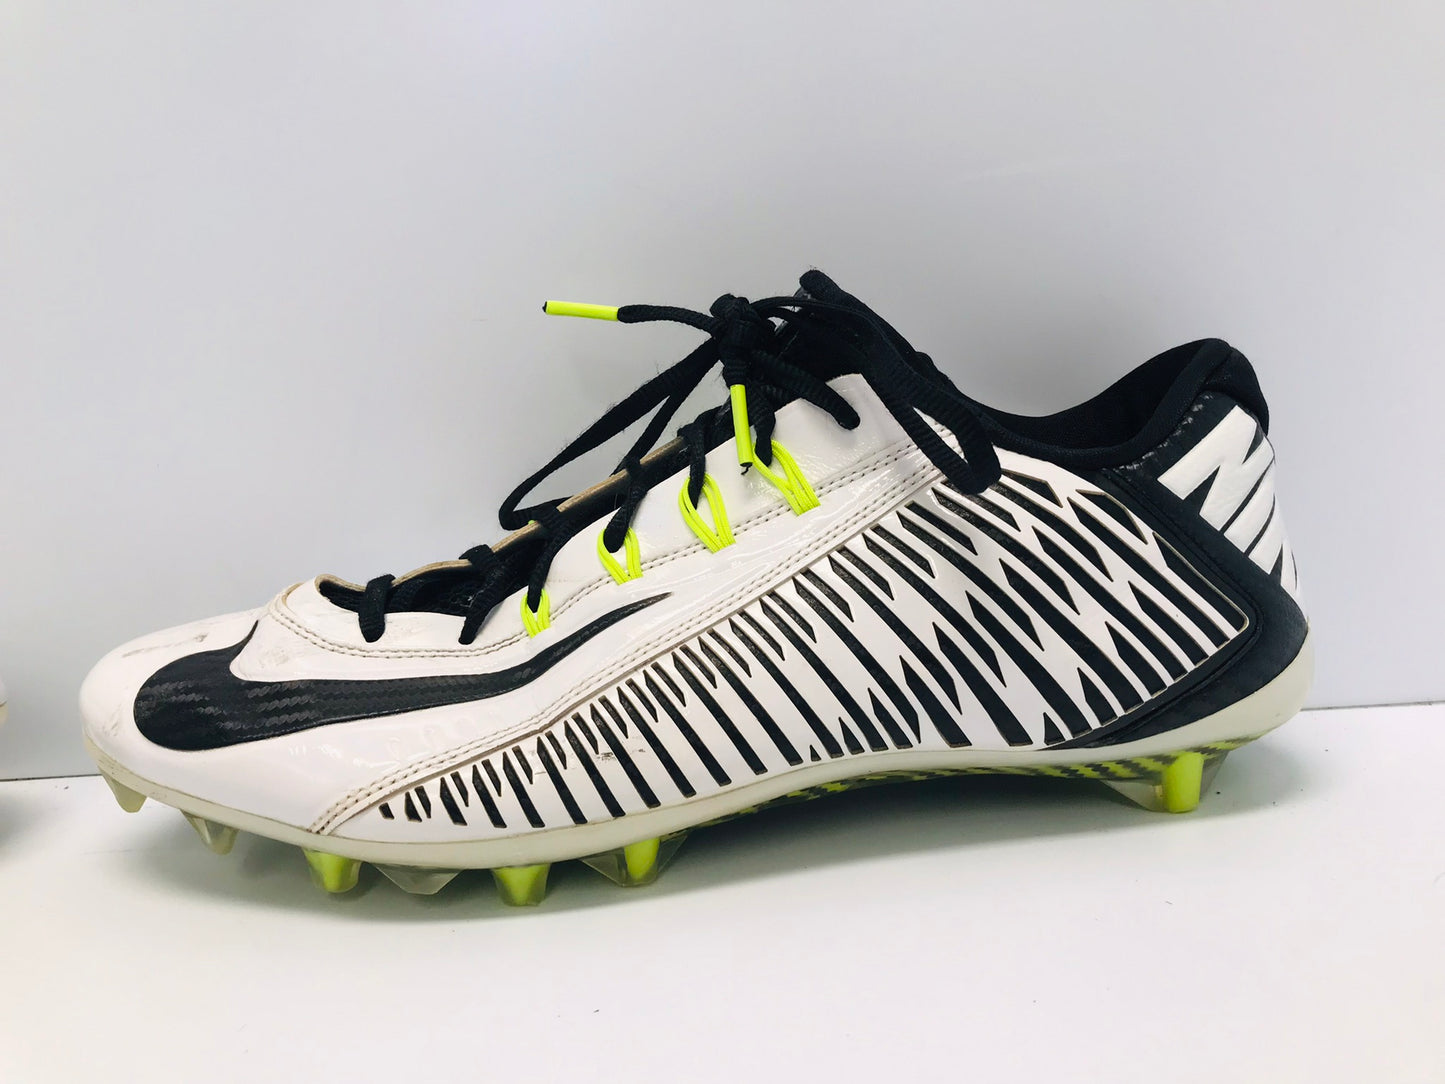 Soccer Shoes Cleats Men's Size 12 Nike FlyWire Black White Lime Excellent Quality